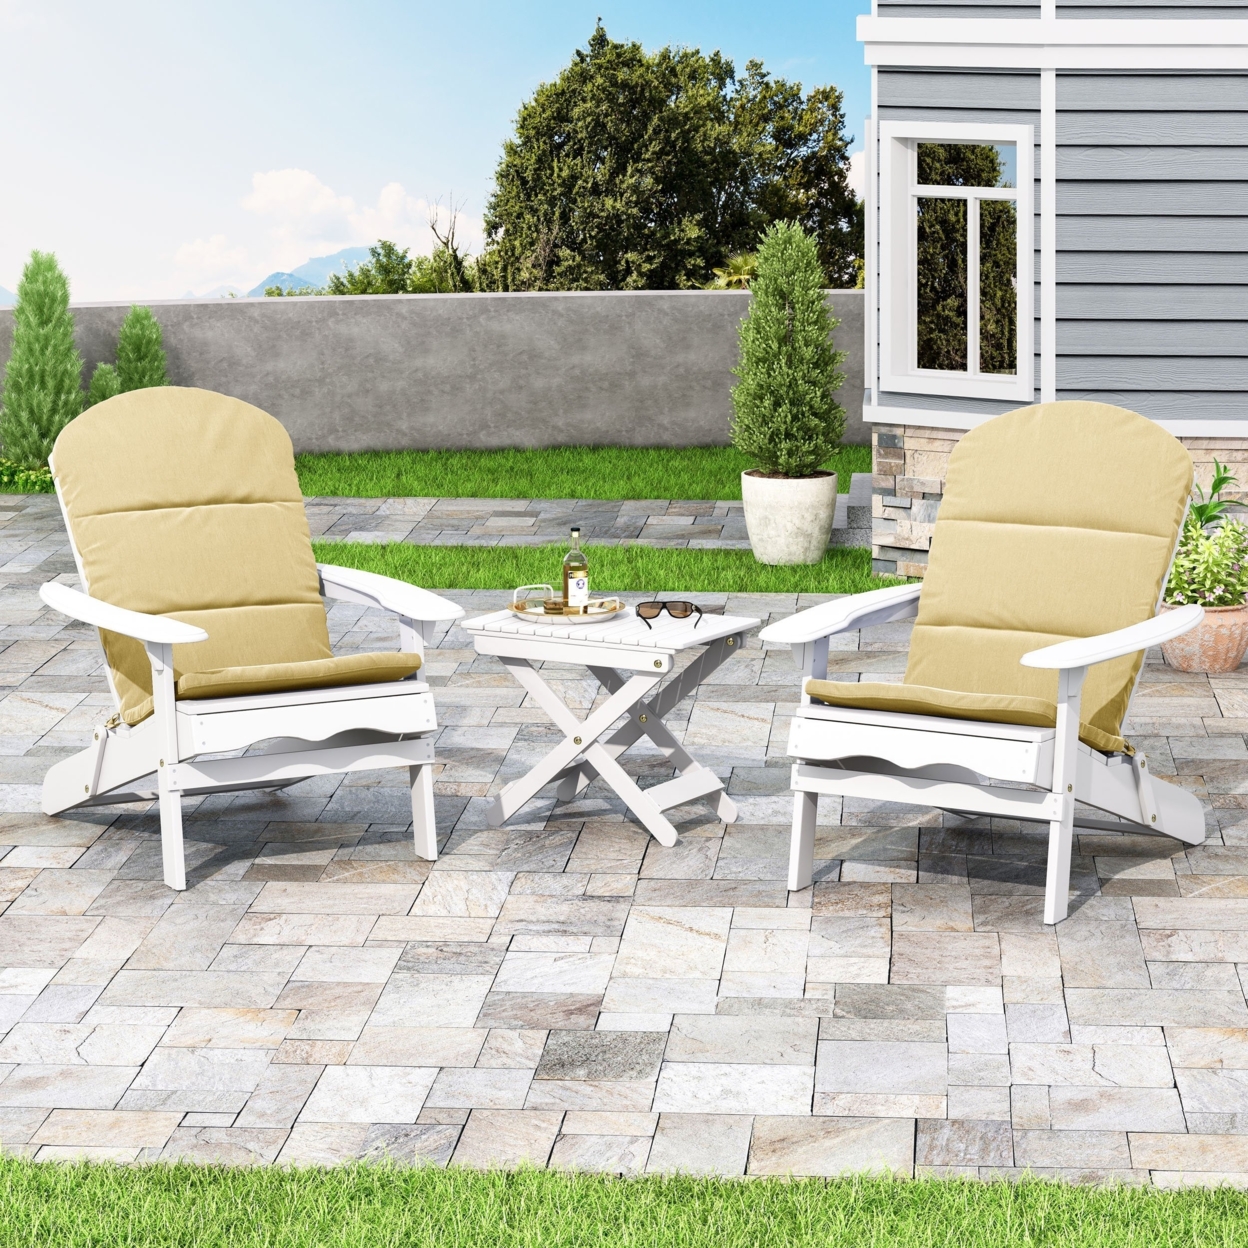 Reed Outdoor 2 Seater Acacia Wood Chat Set With Water Resistant Cushions - White/khaki